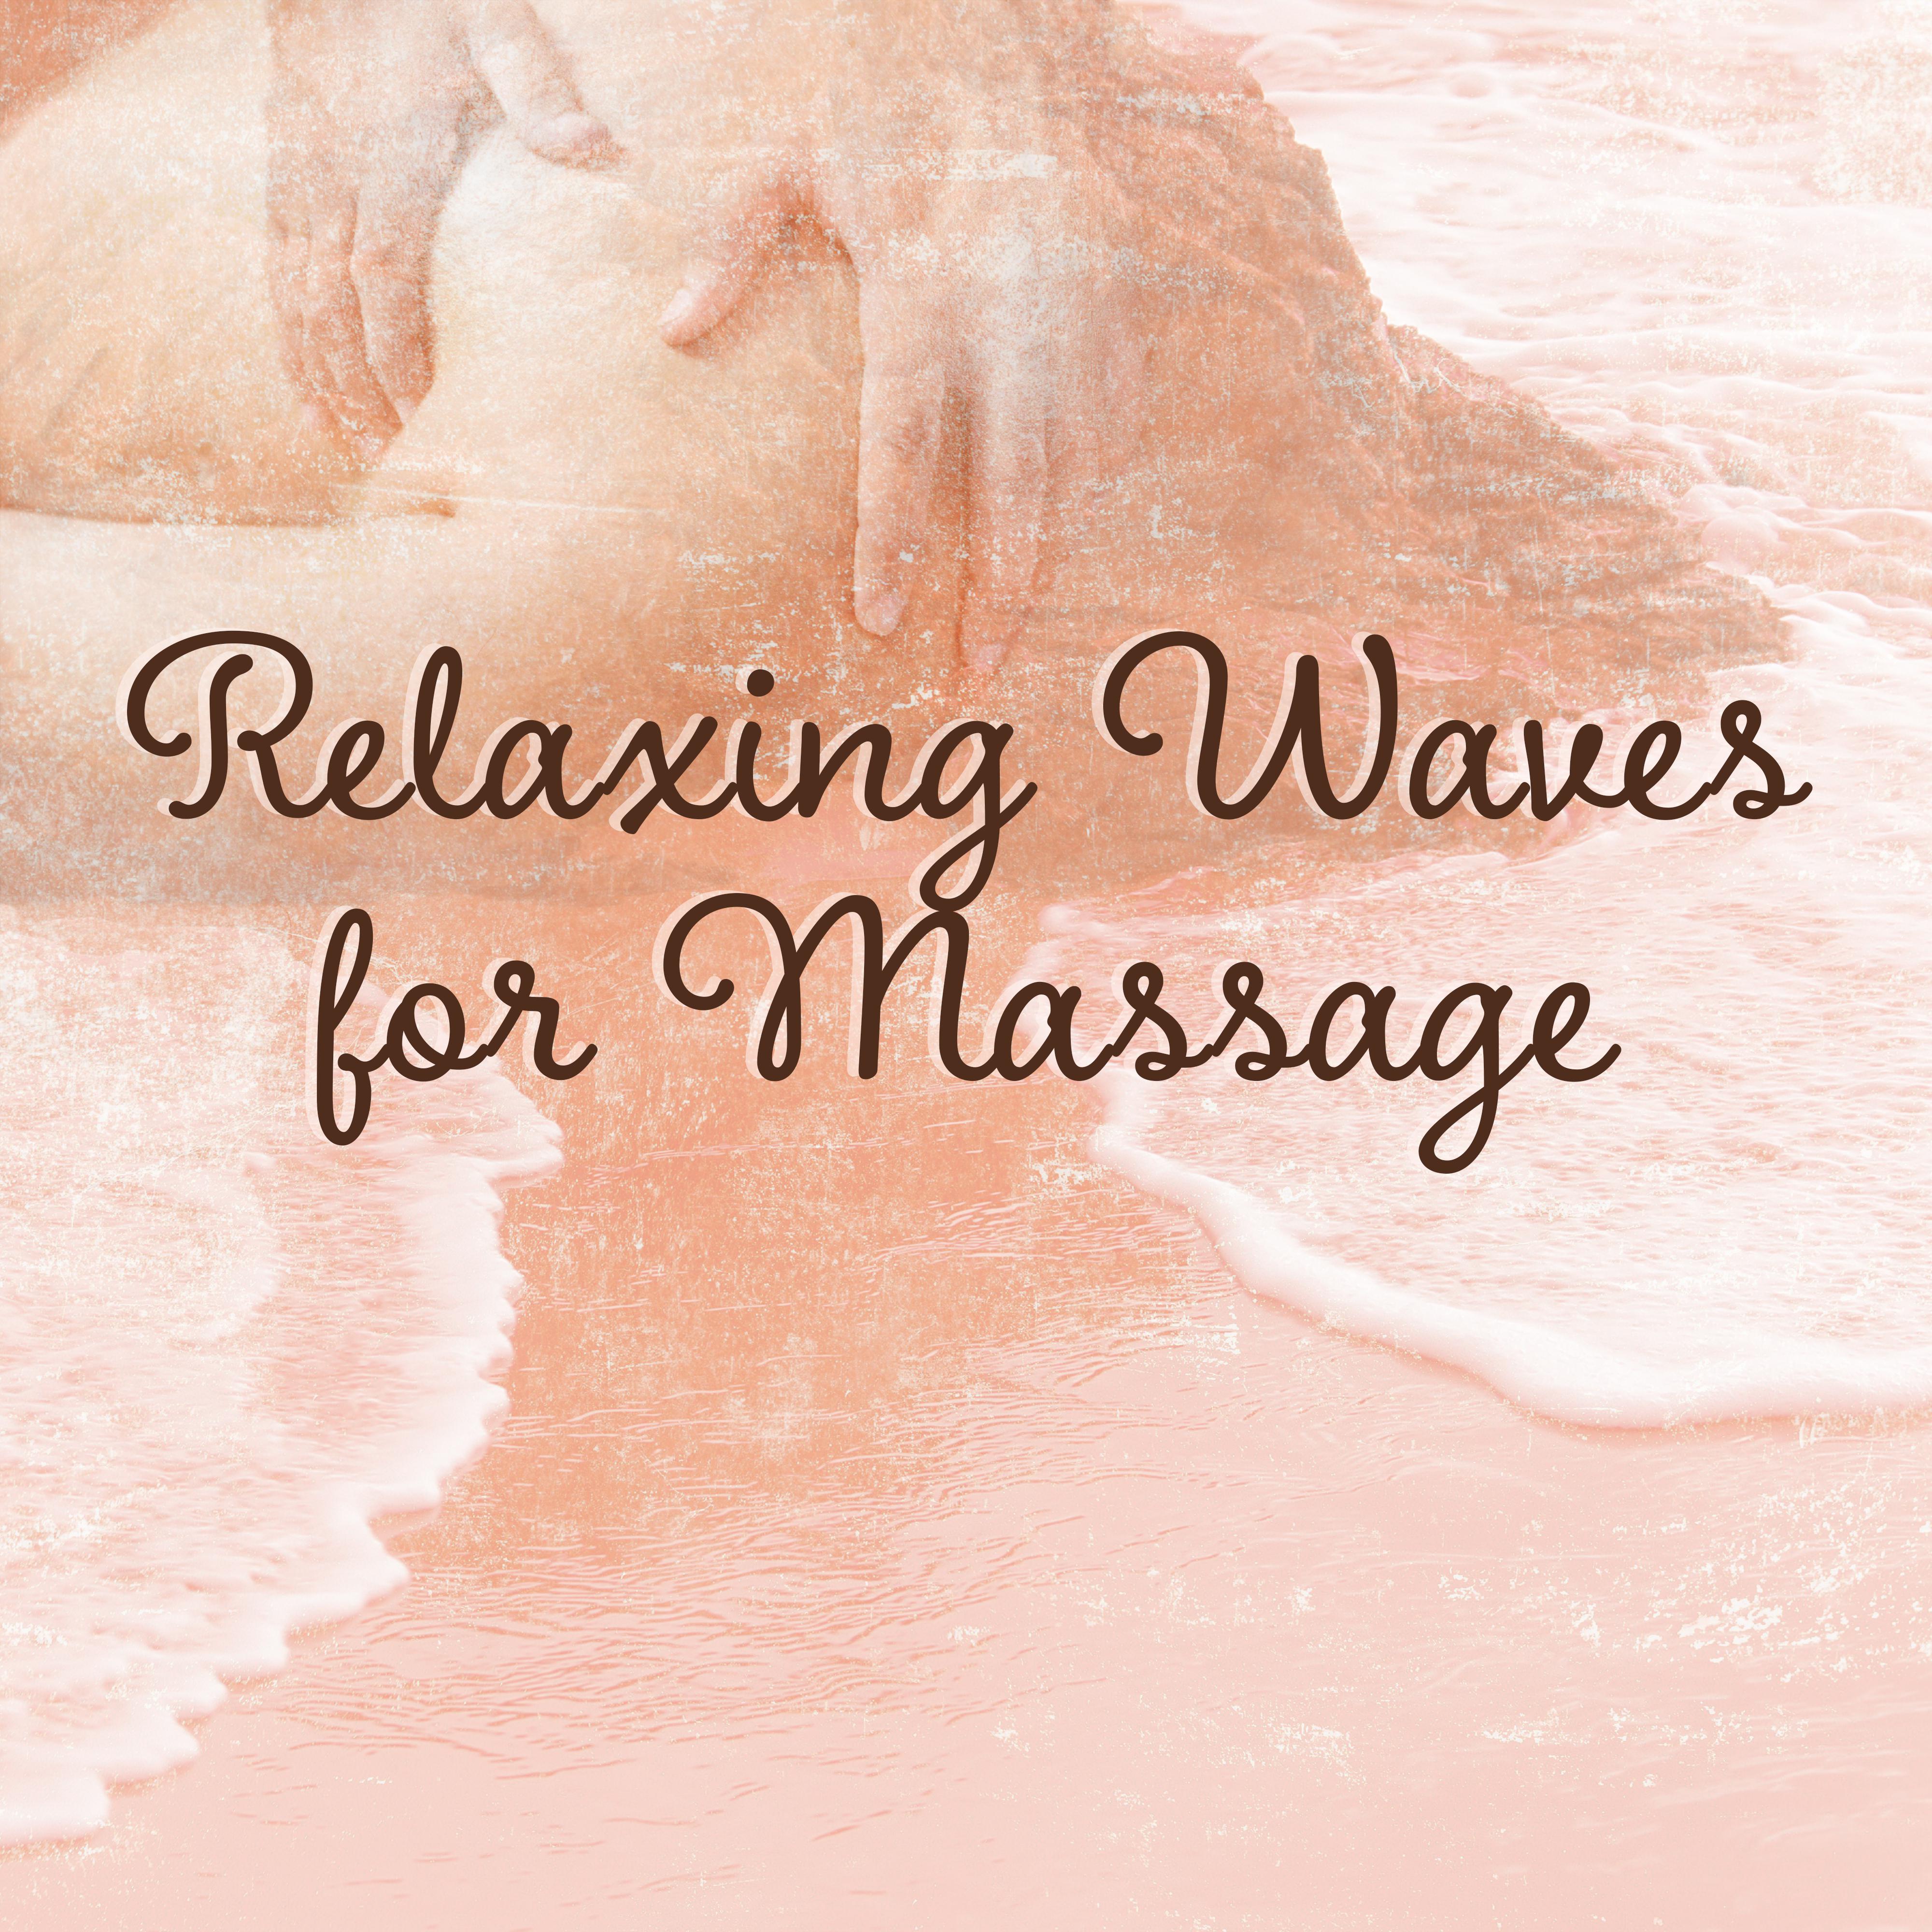 Relaxing Waves for Massage – Relaxing Music, New Age 2017 for Massage, Spa Treatments, Rest